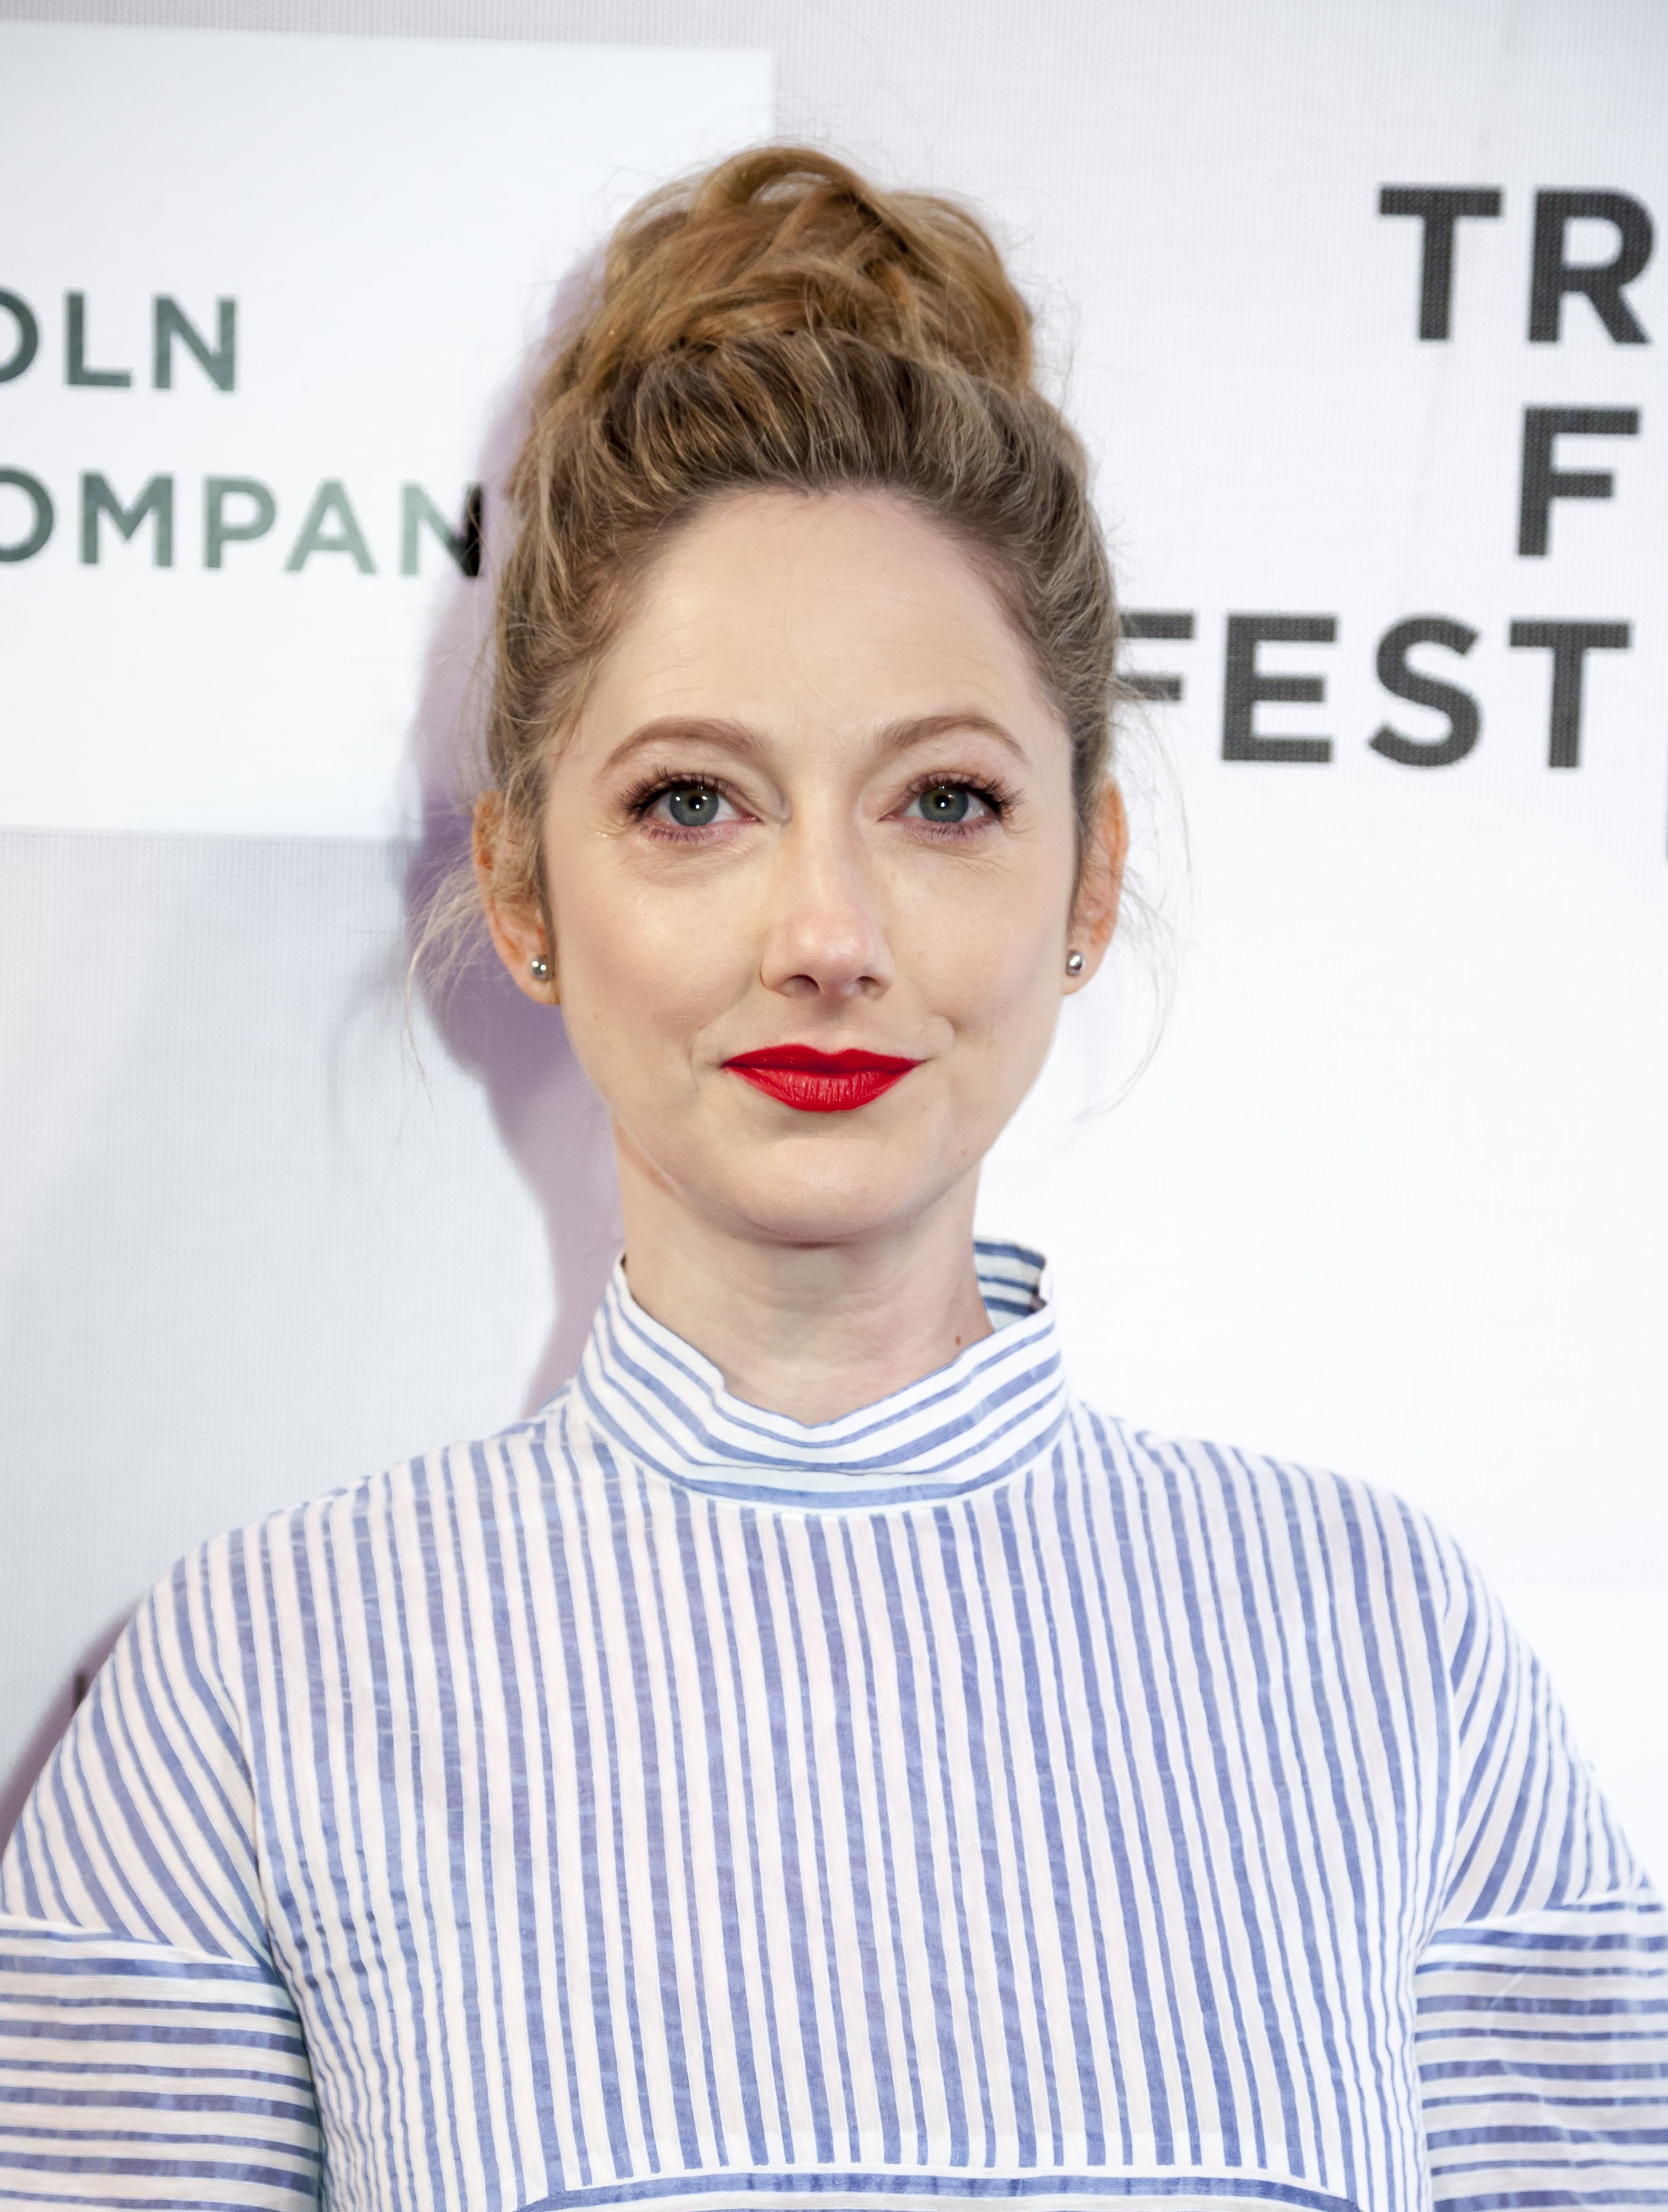 Judy Greer wears red lipstick and a blue and white striped shirt.